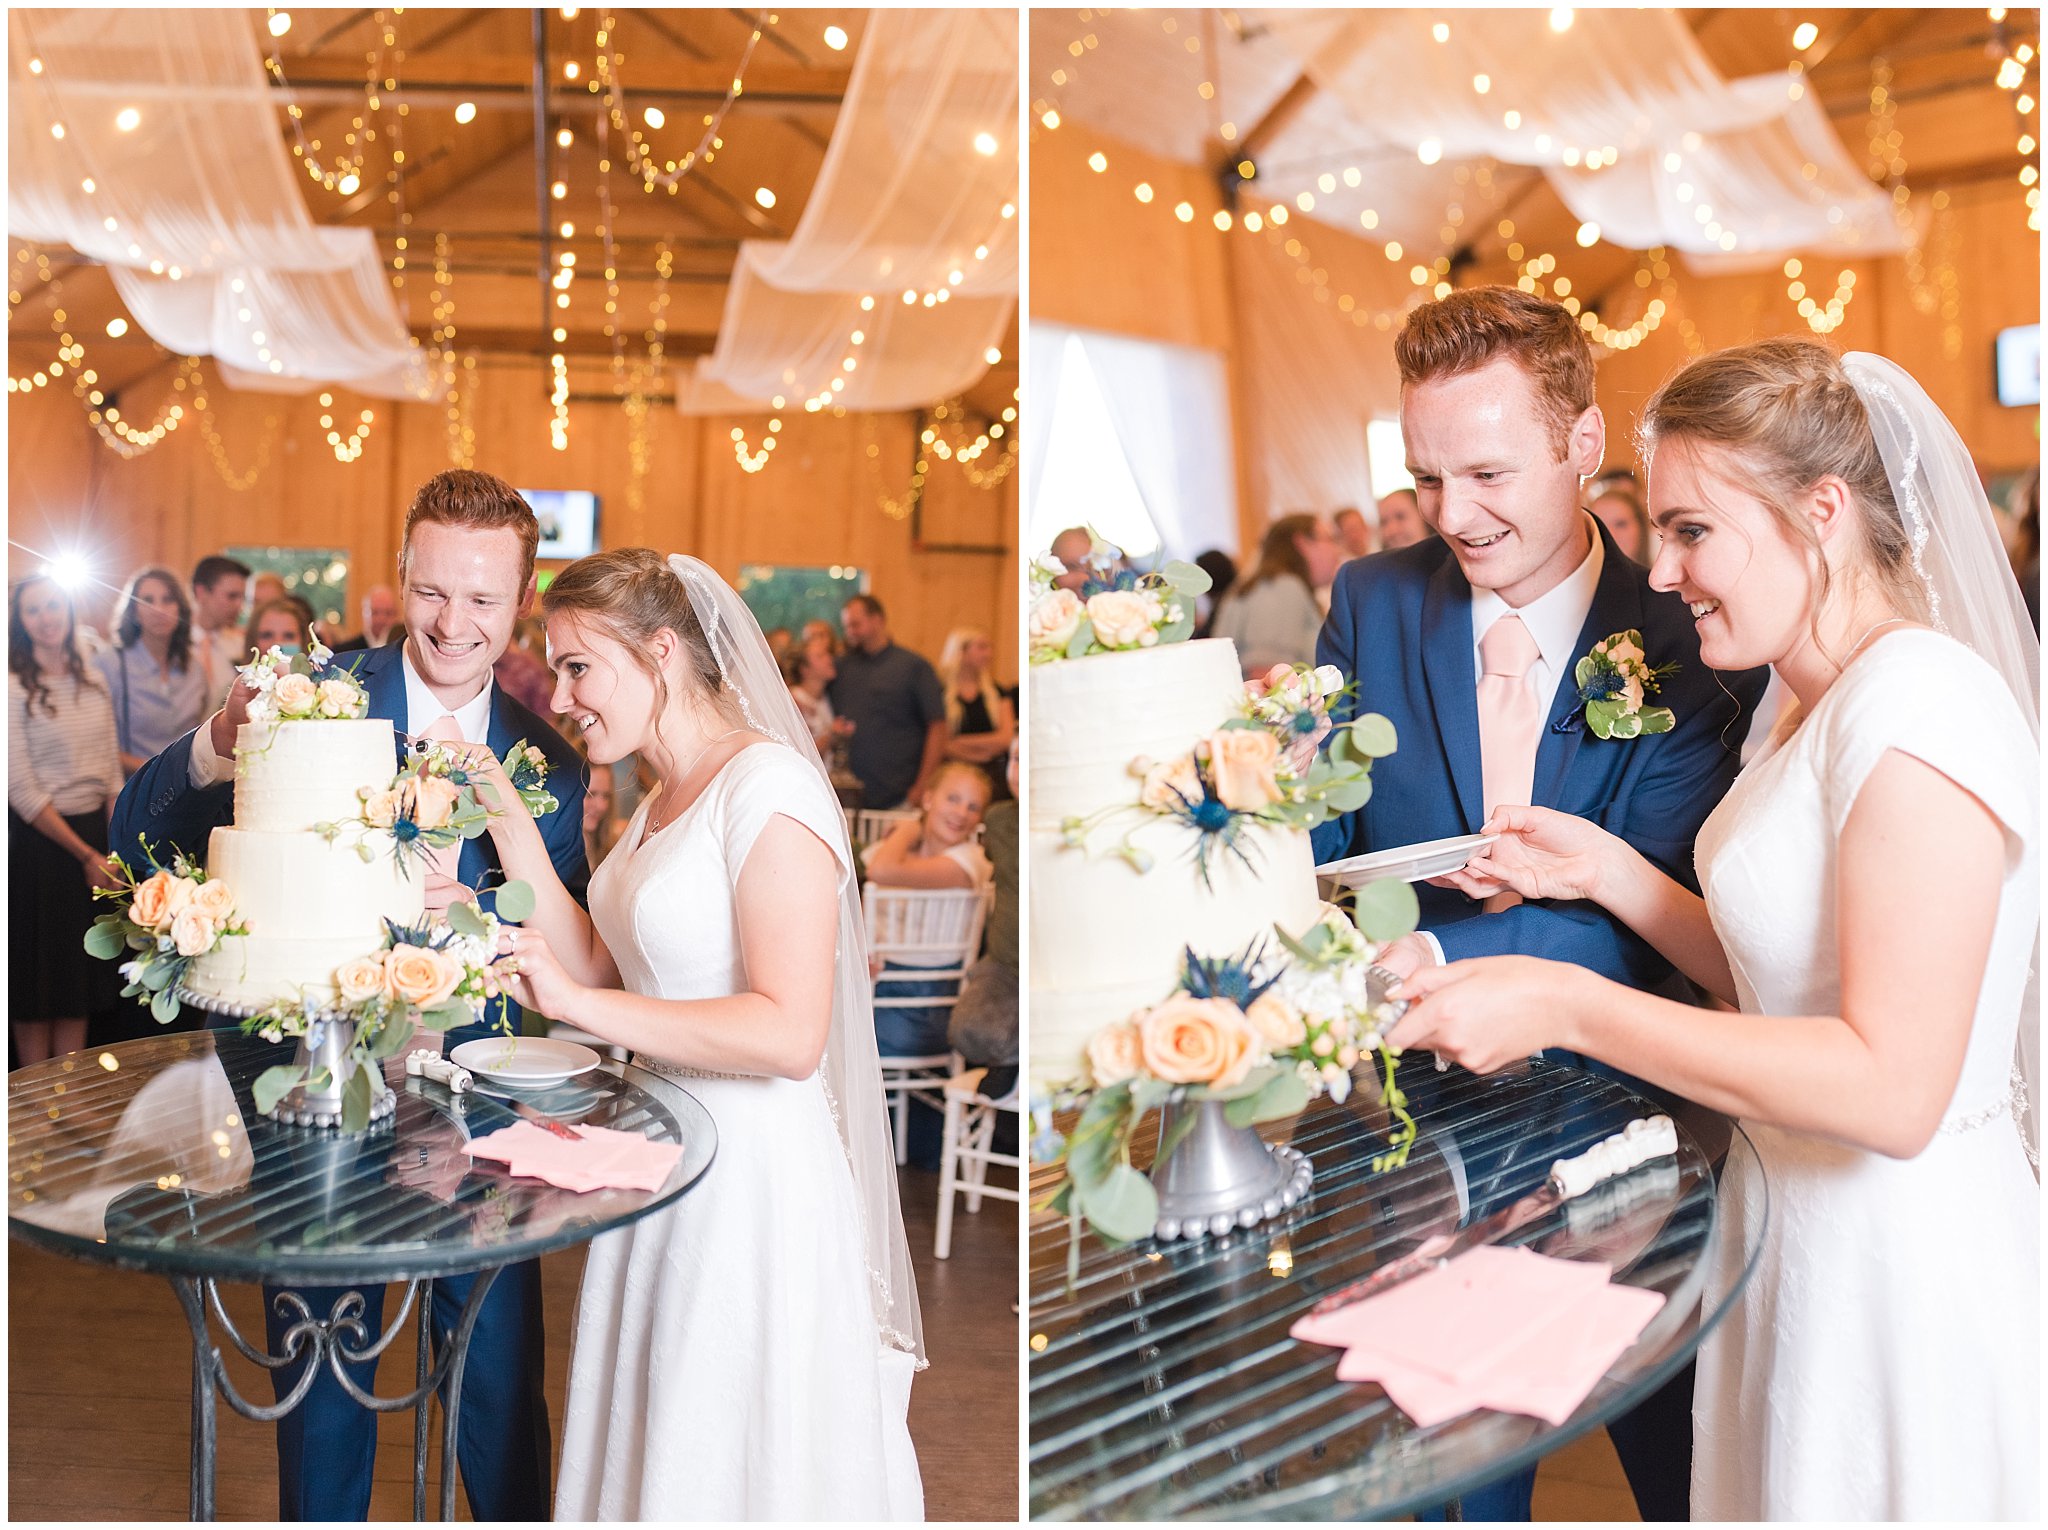 Bride and groom cut cake before cake smash | white three tier cake with roses and blue thistles | Oak Hills Reception and Events Center | Jessie and Dallin Photography